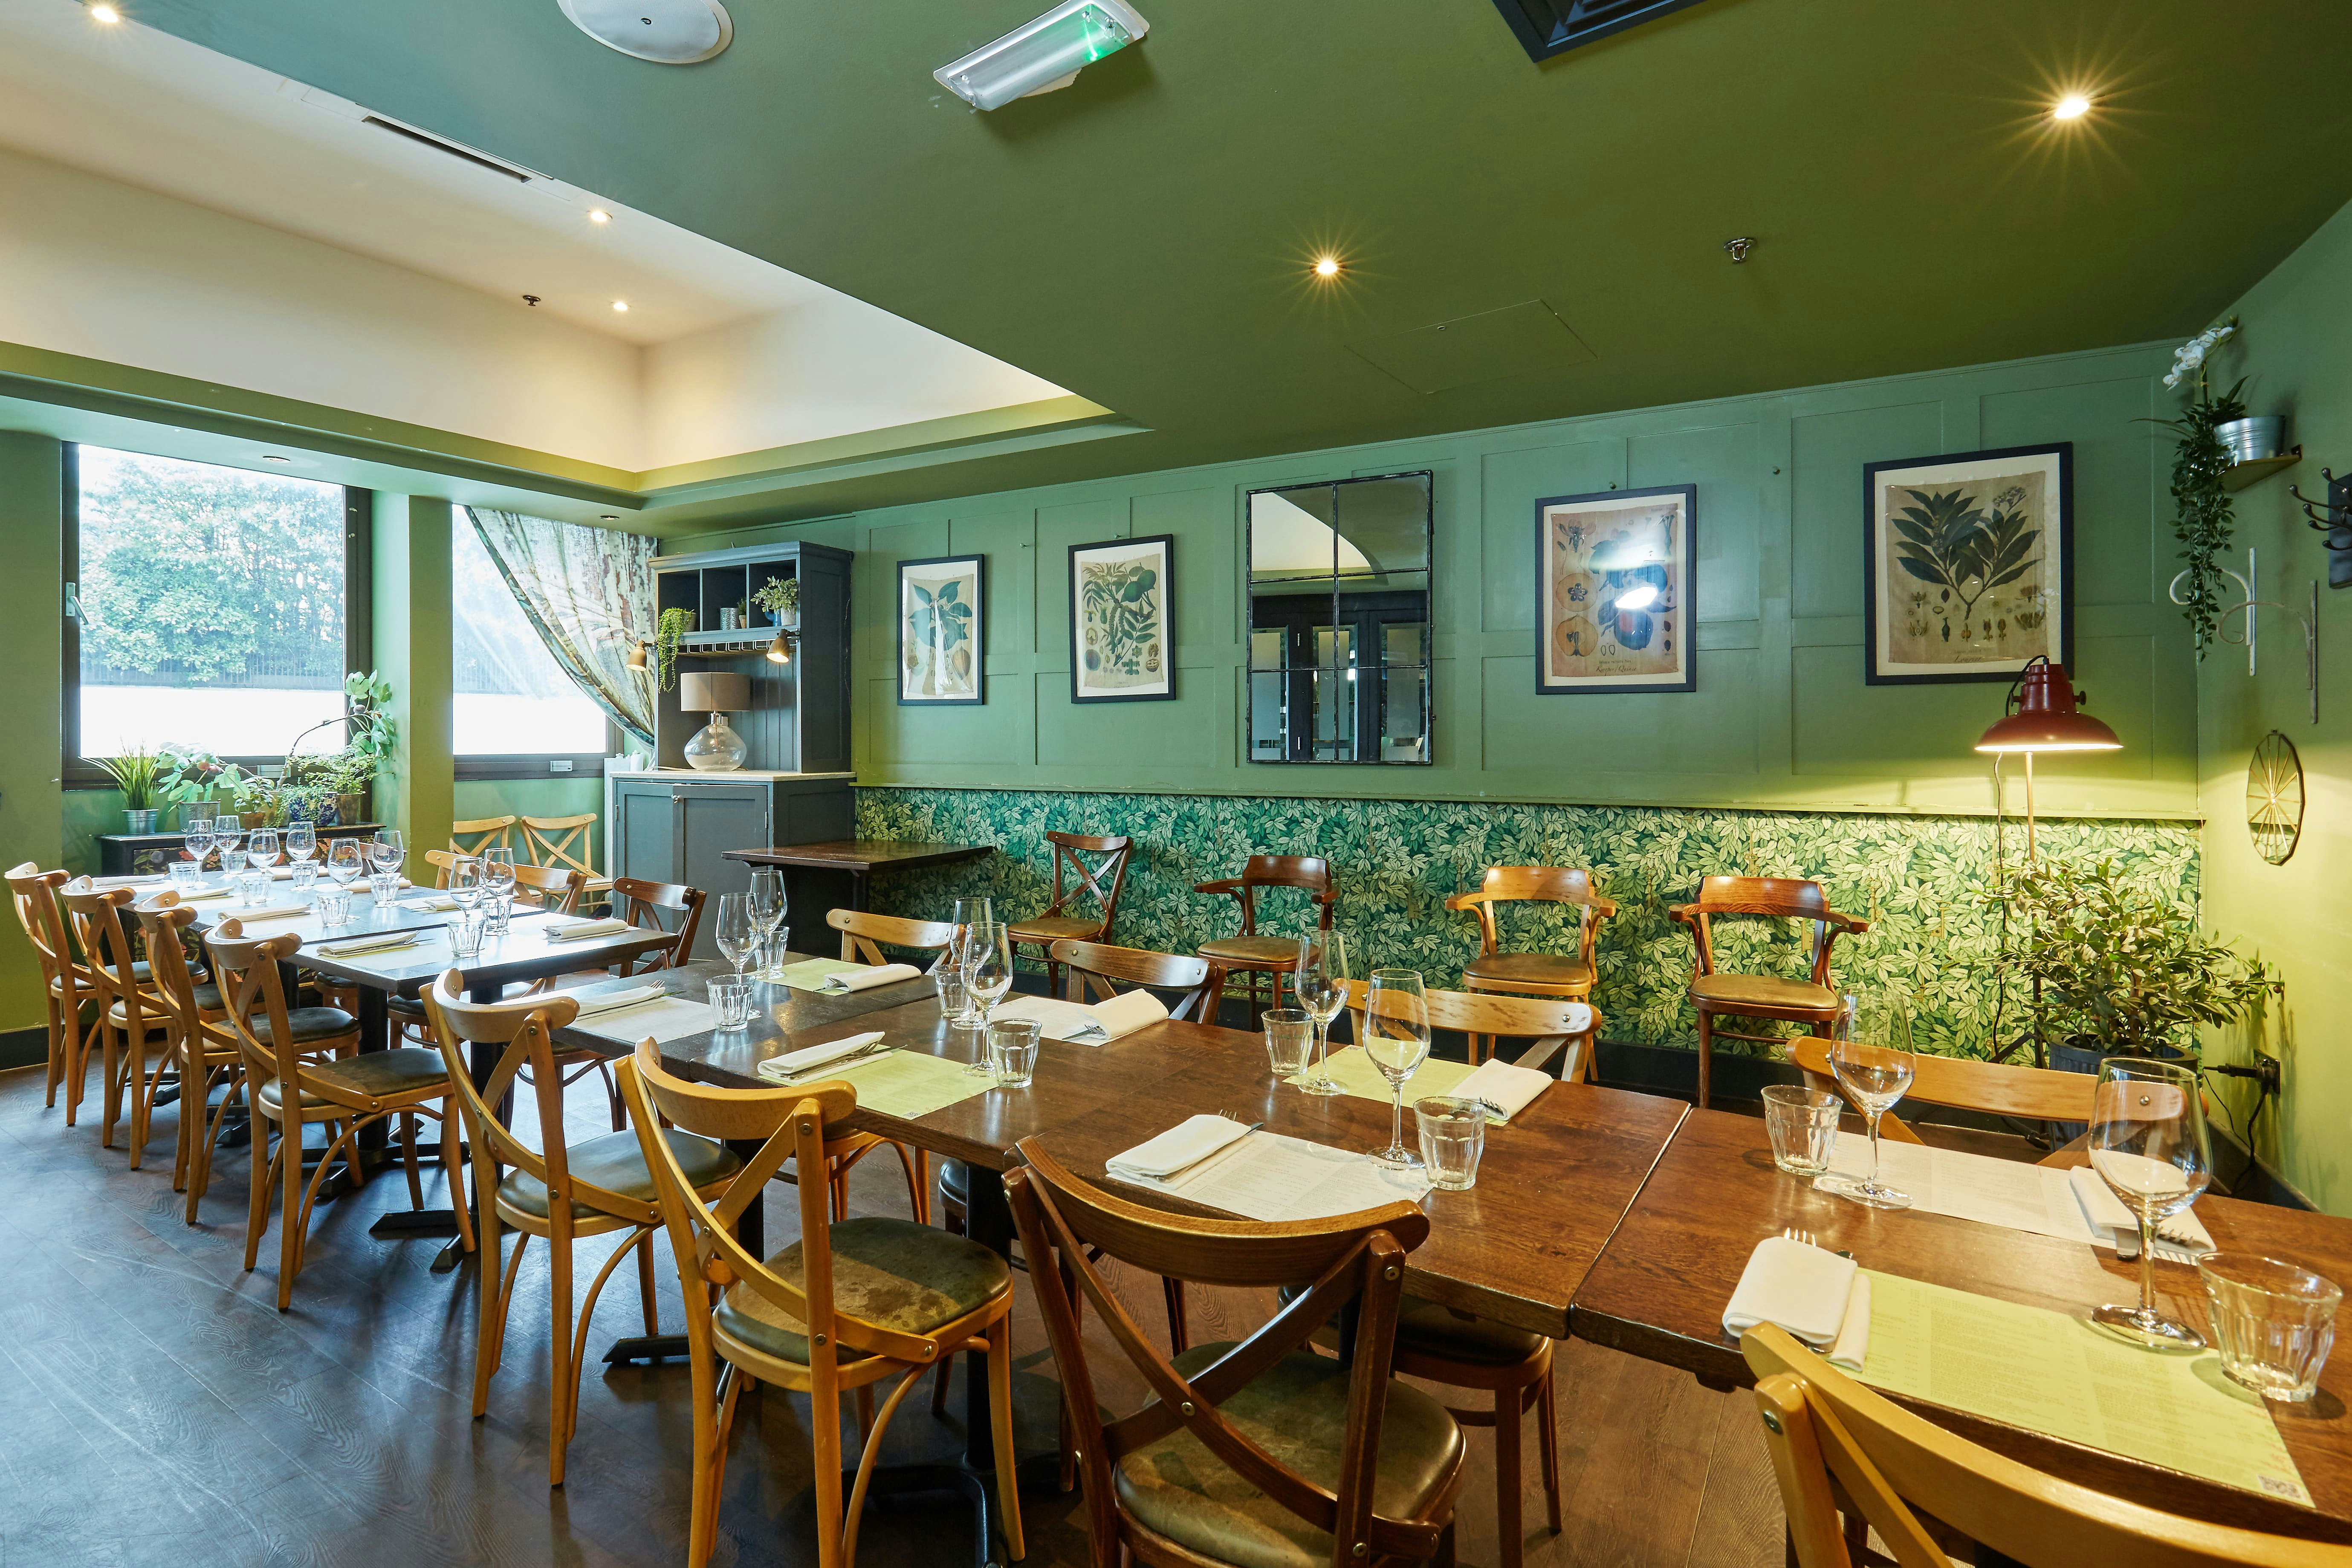 Brasserie Blanc Southbank - Exclusive Hire image 4